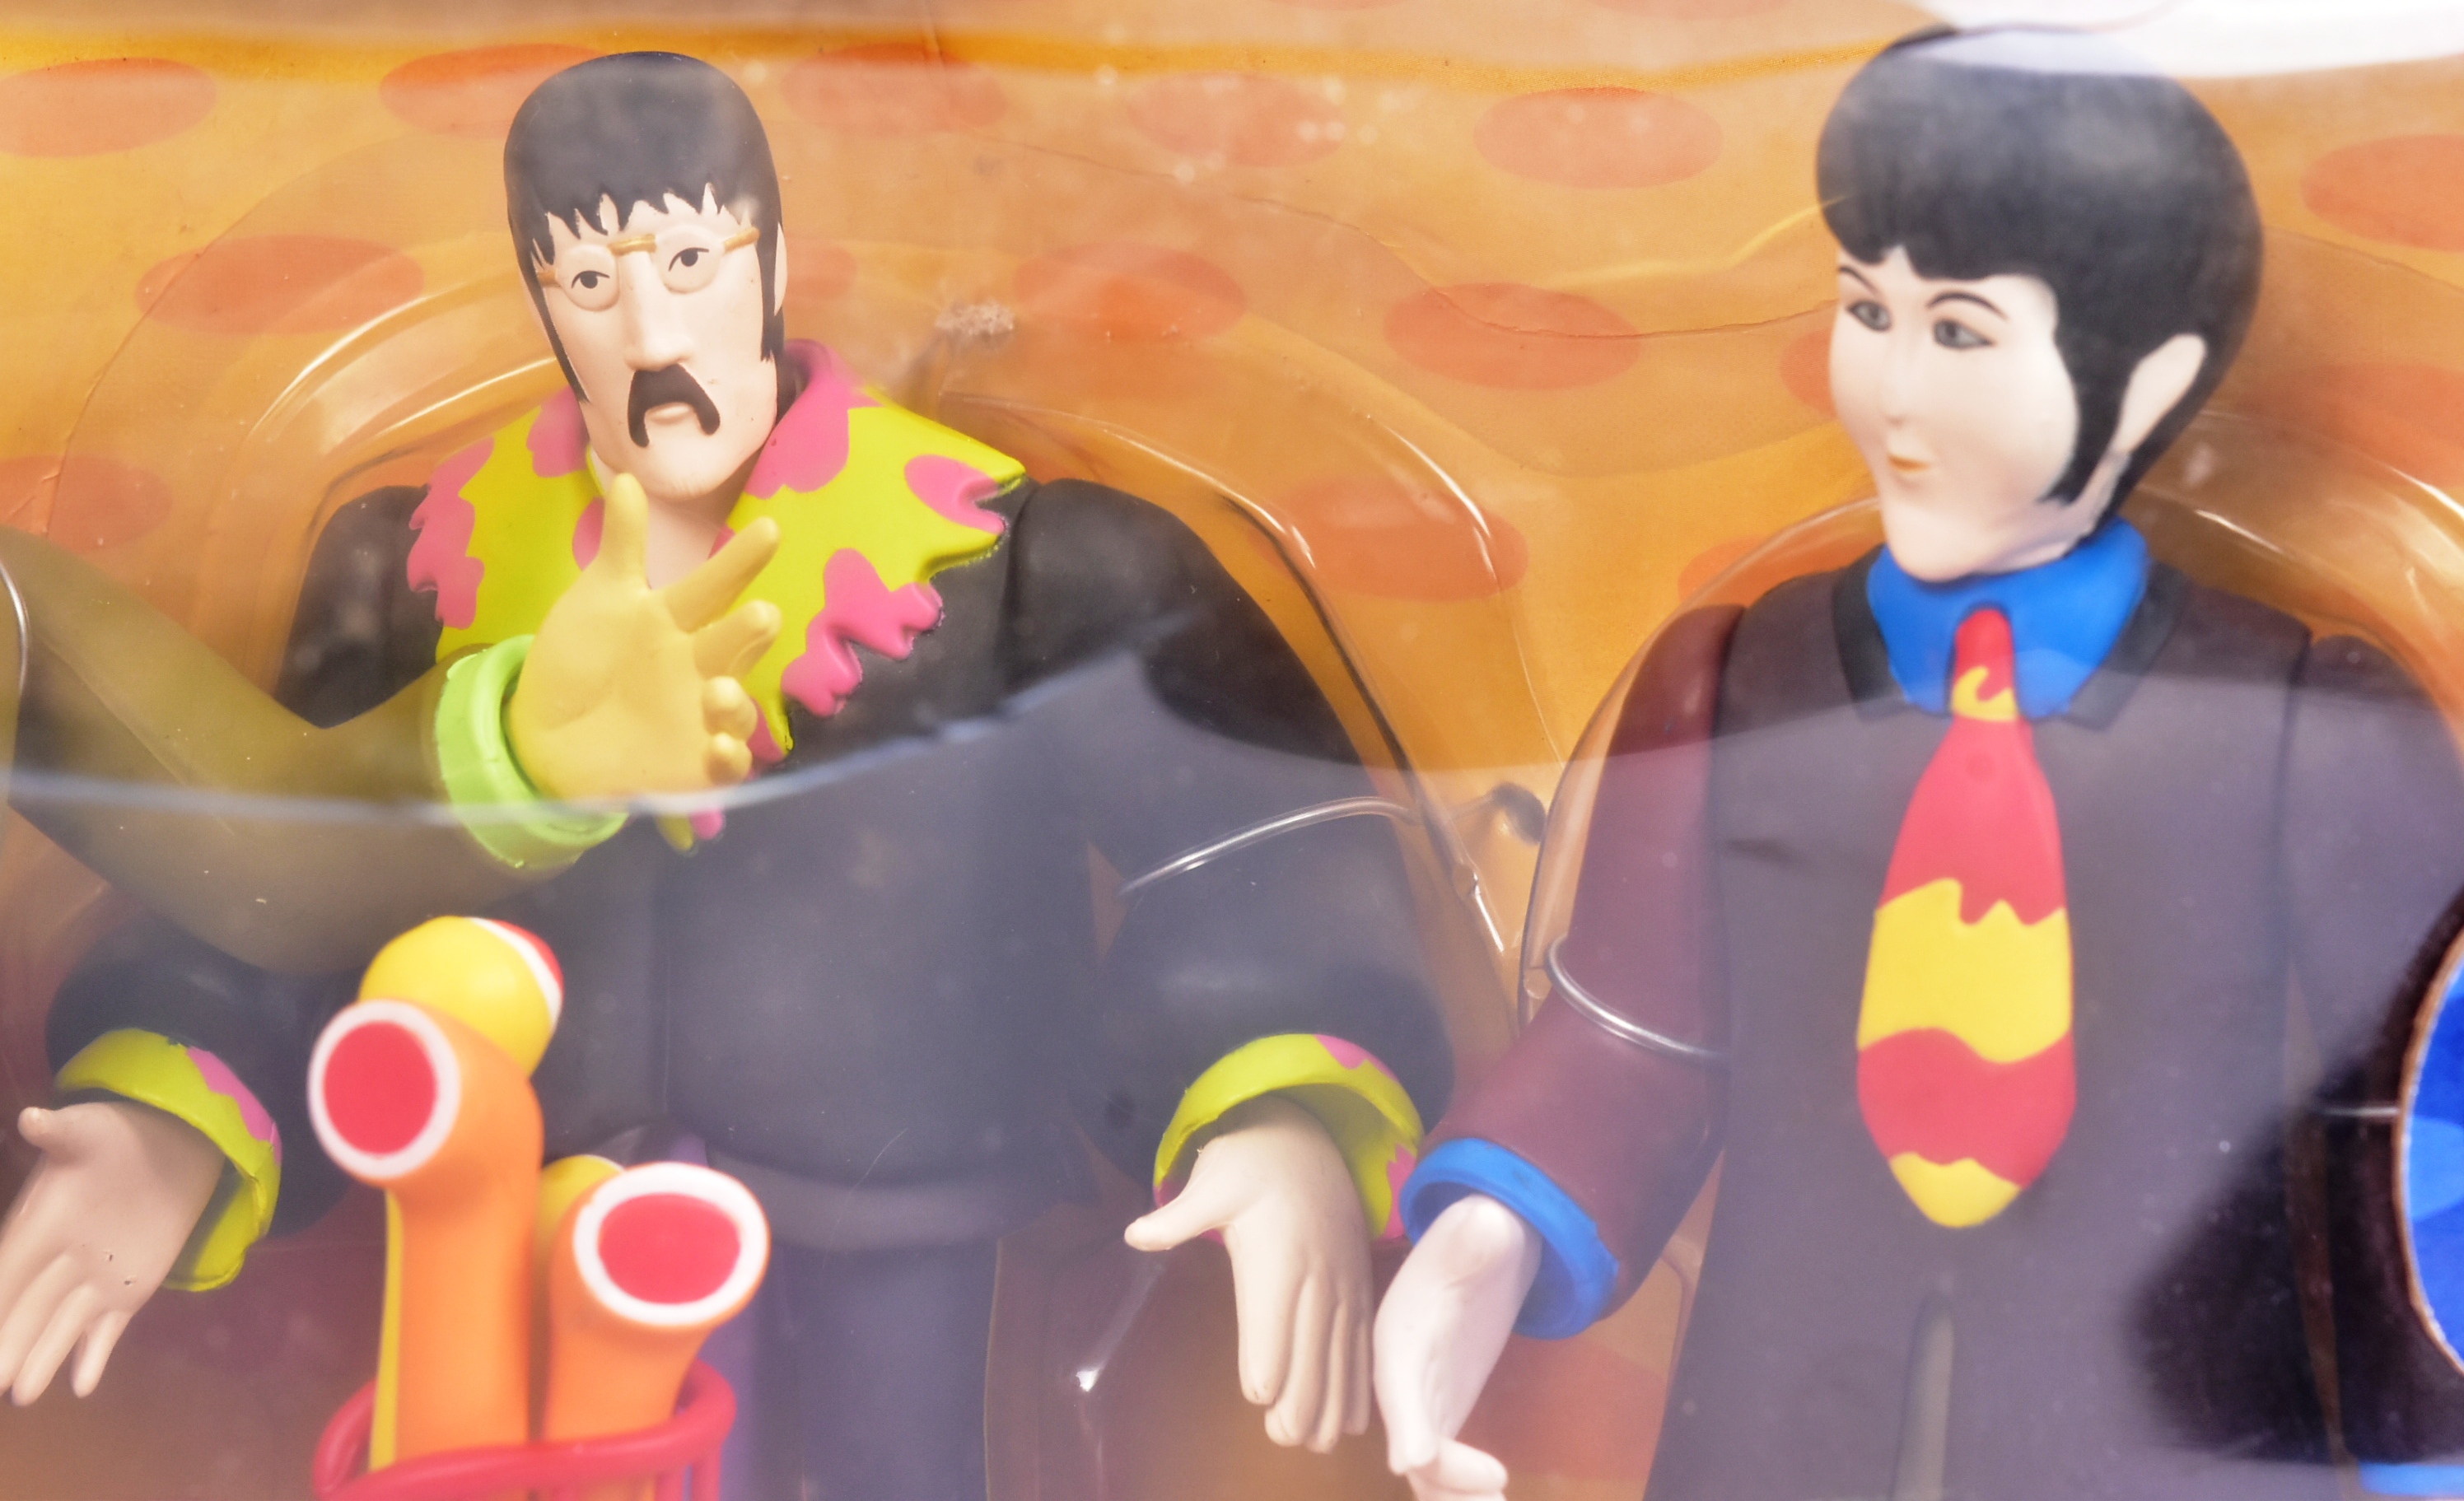 THE BEATLES - MCFARLANE TOYS - YELLOW SUBMARINE ACTION FIGURES - Image 4 of 4